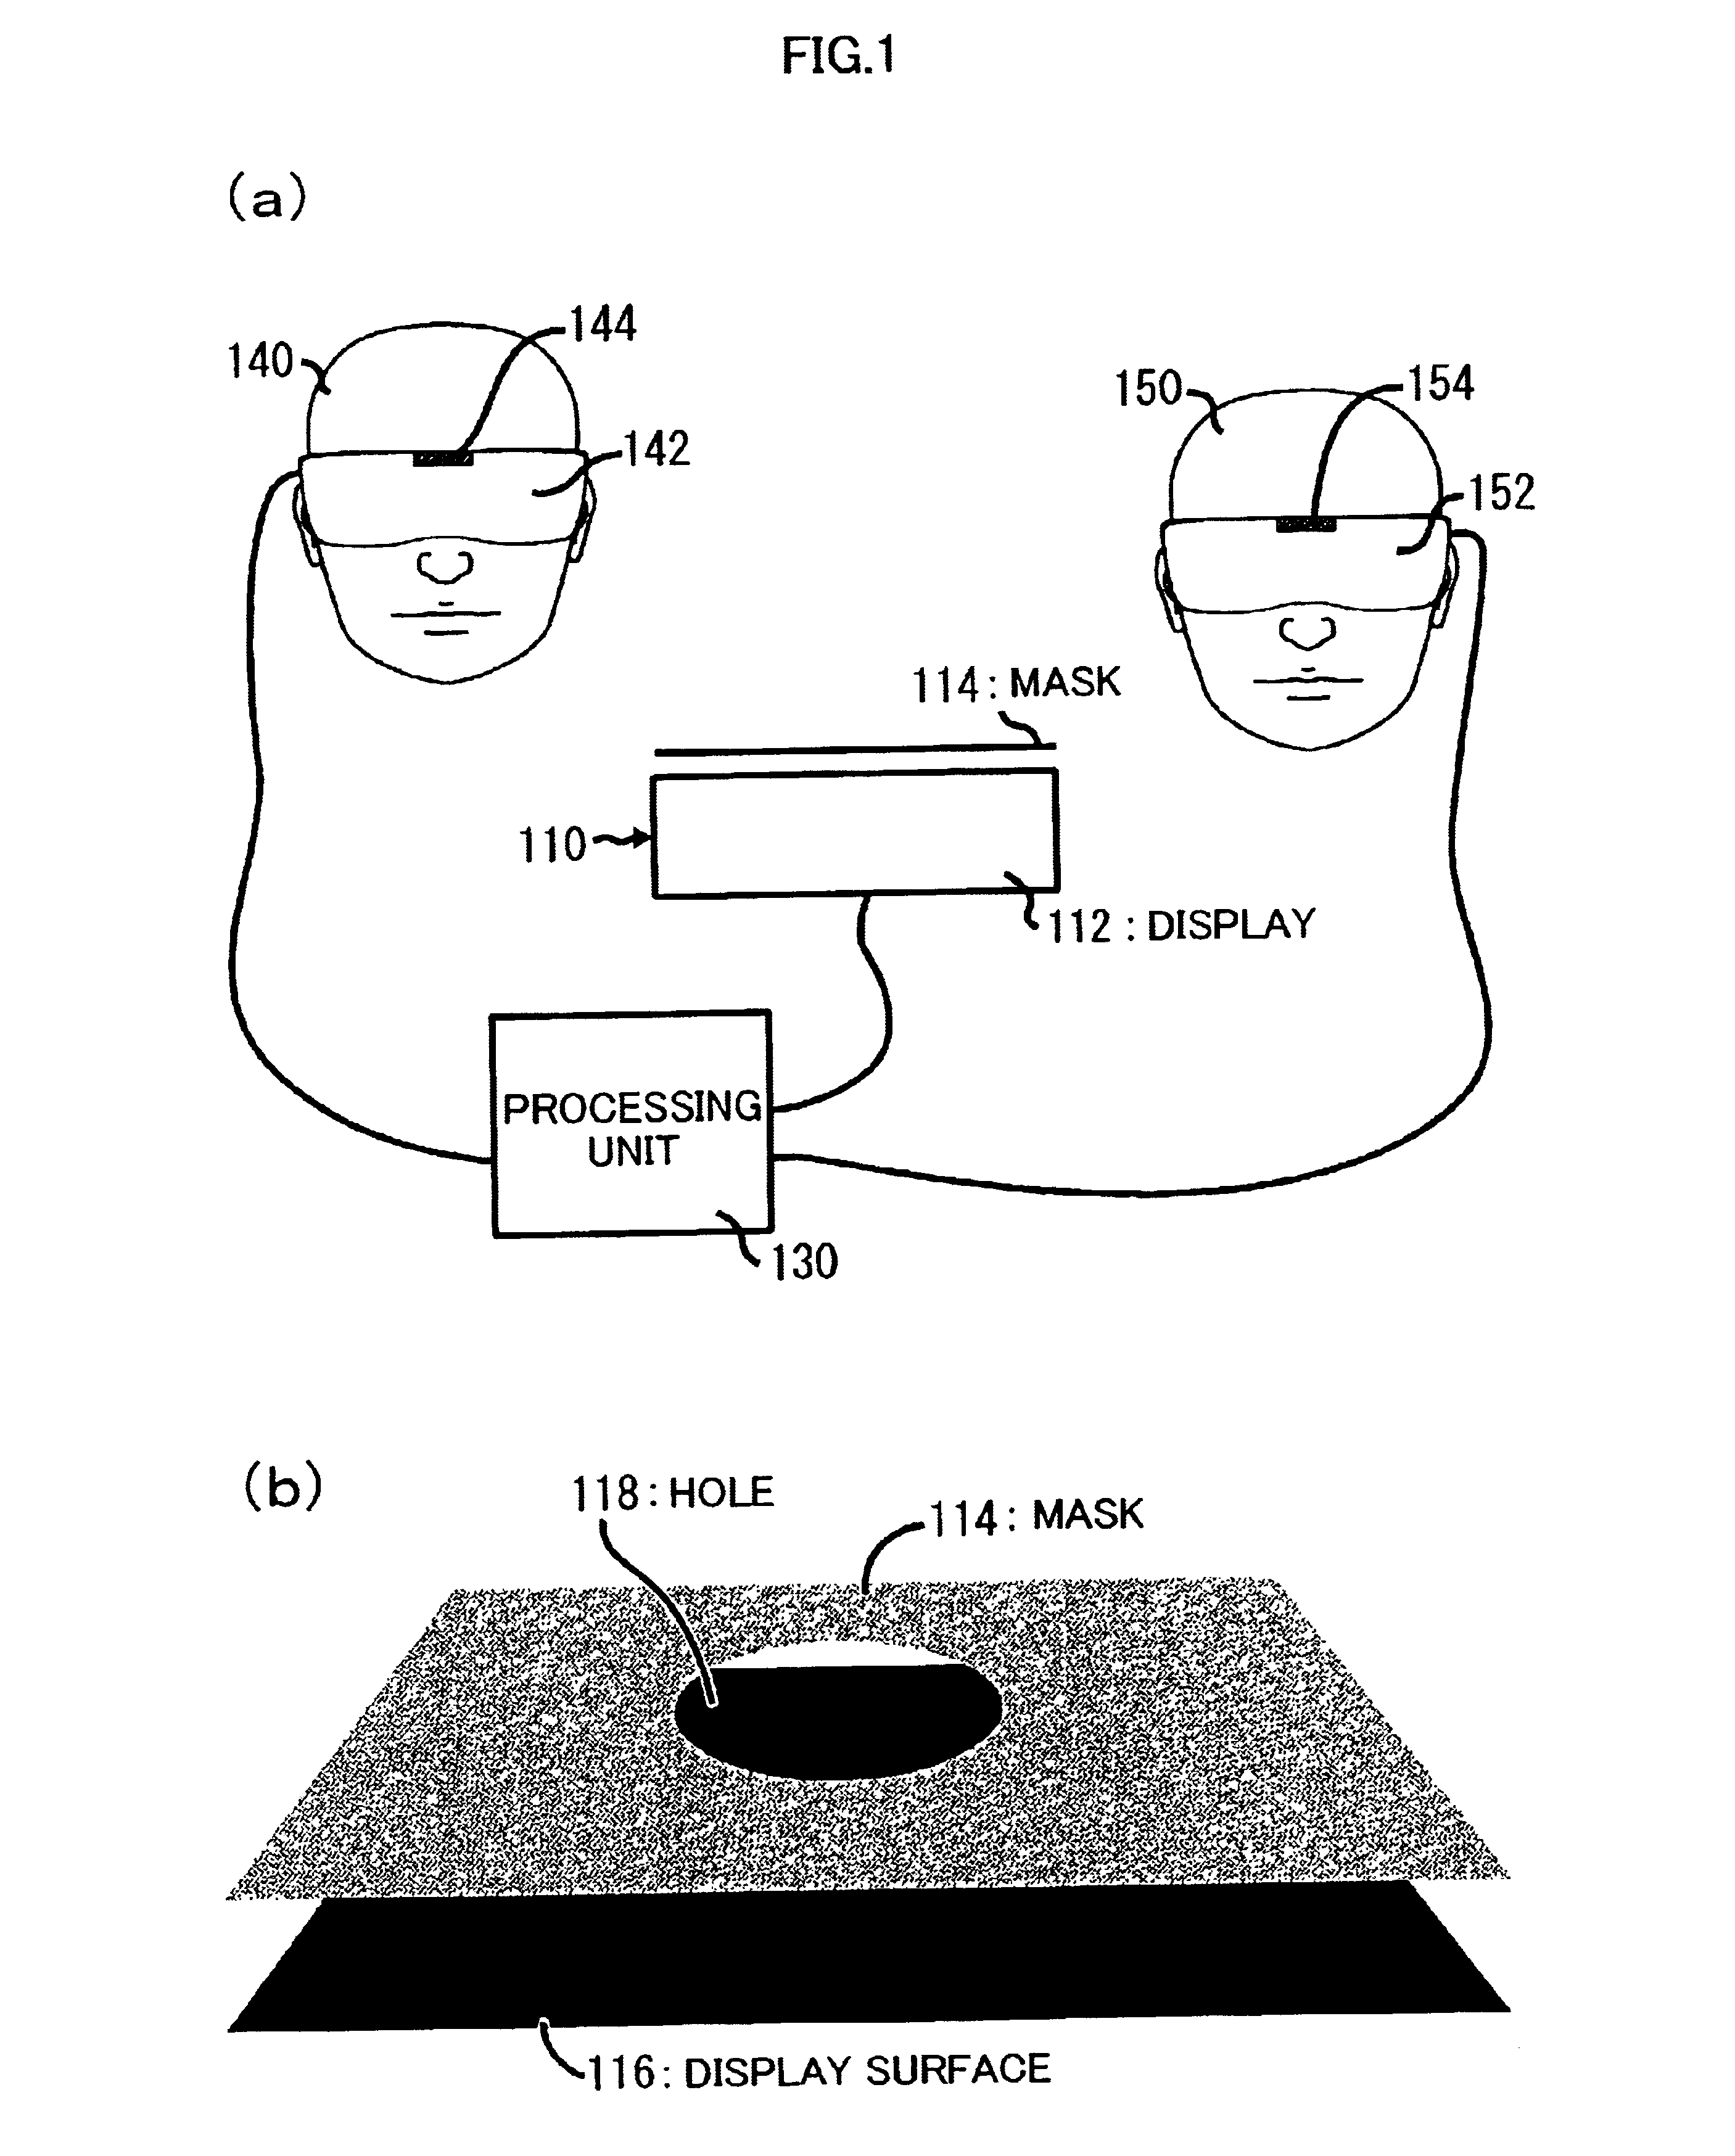 Multi-person shared display device